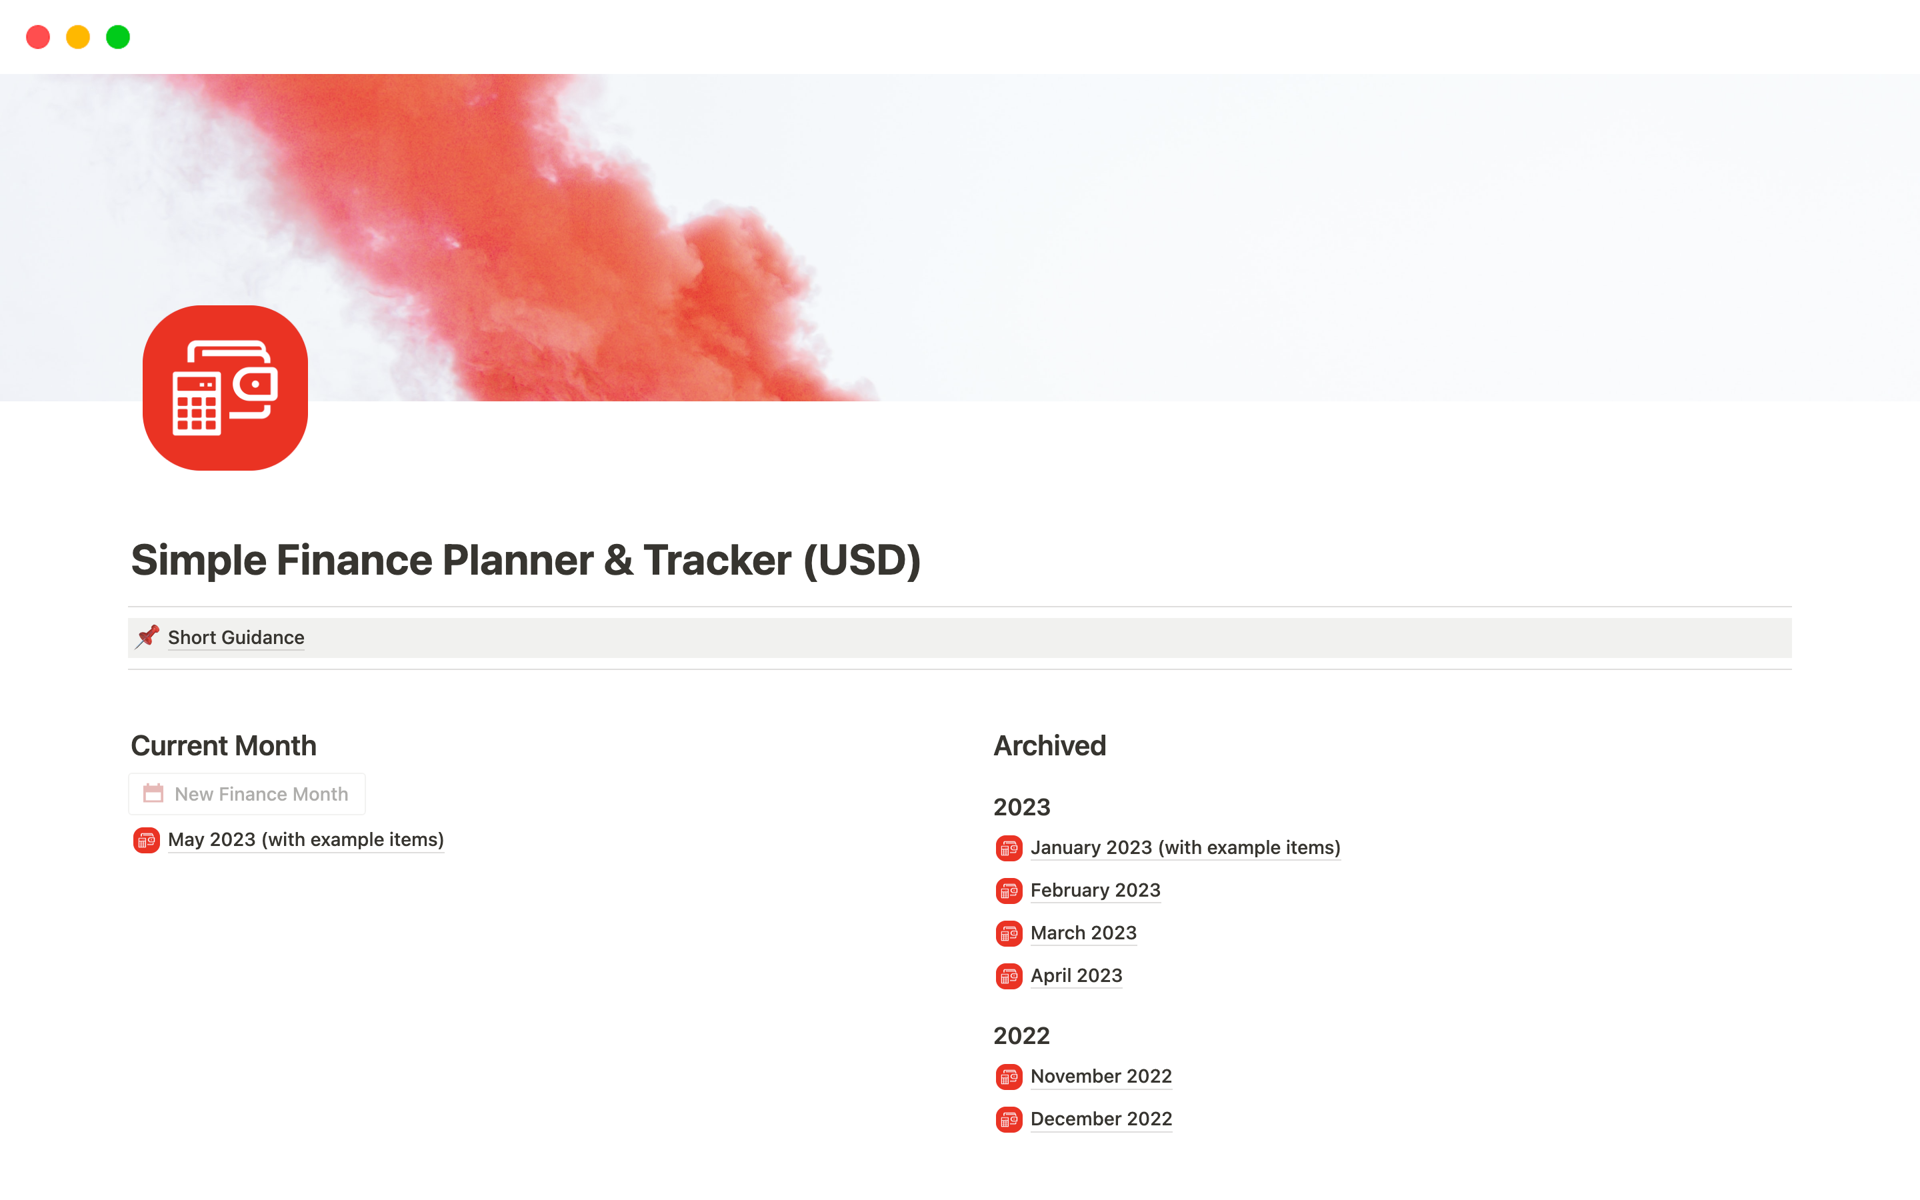 Simple Finance Planner & Tracker is a personal finance system designed to plan & track expenses every month and show progress stats throughout your tracking process.